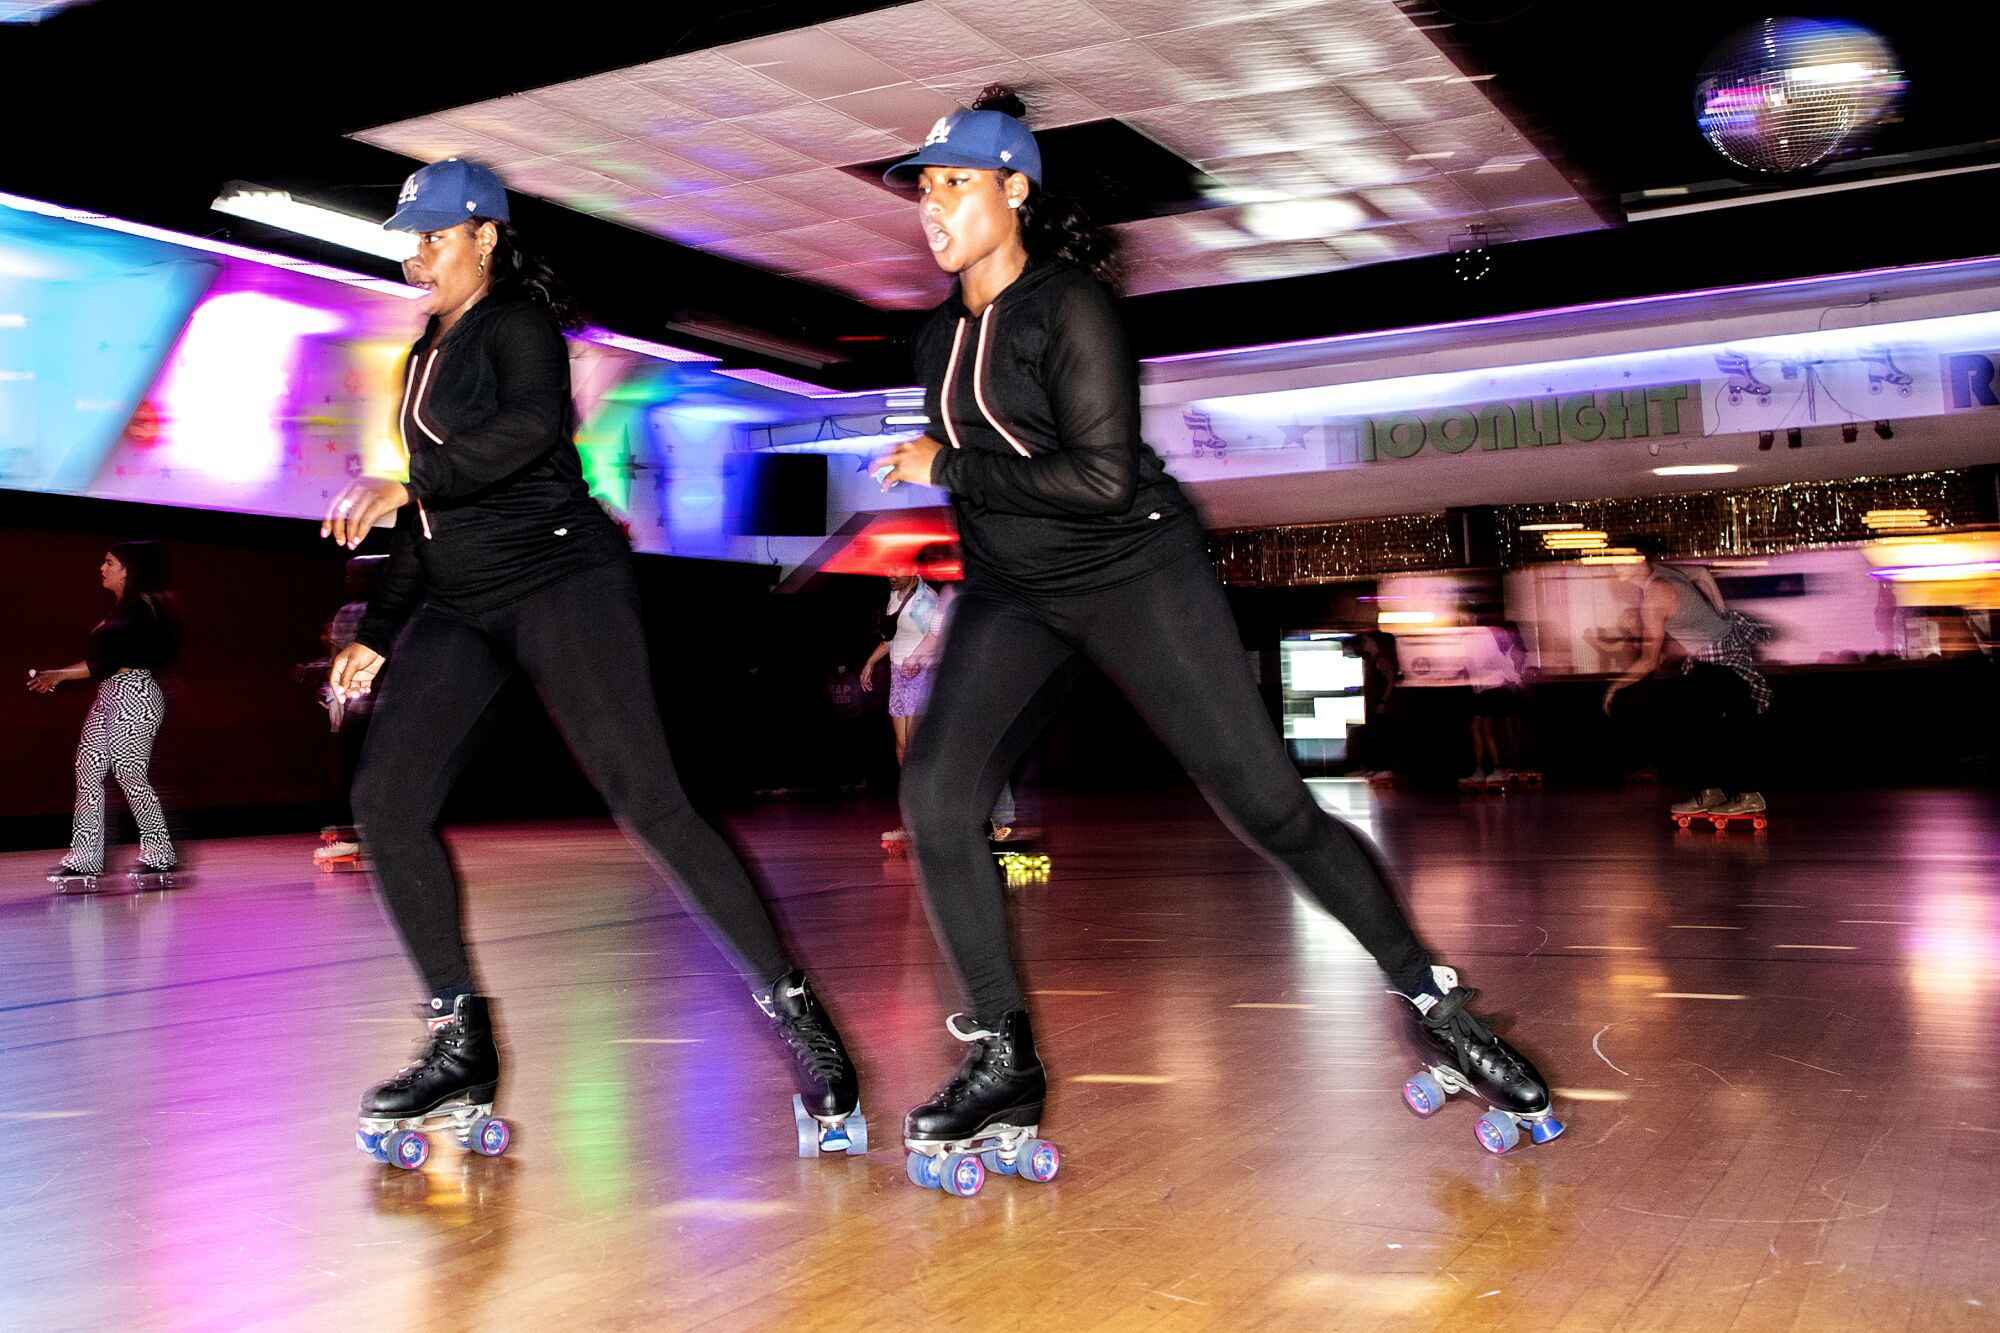 Two people wearing the same all-black outfit and blue caps while skating.